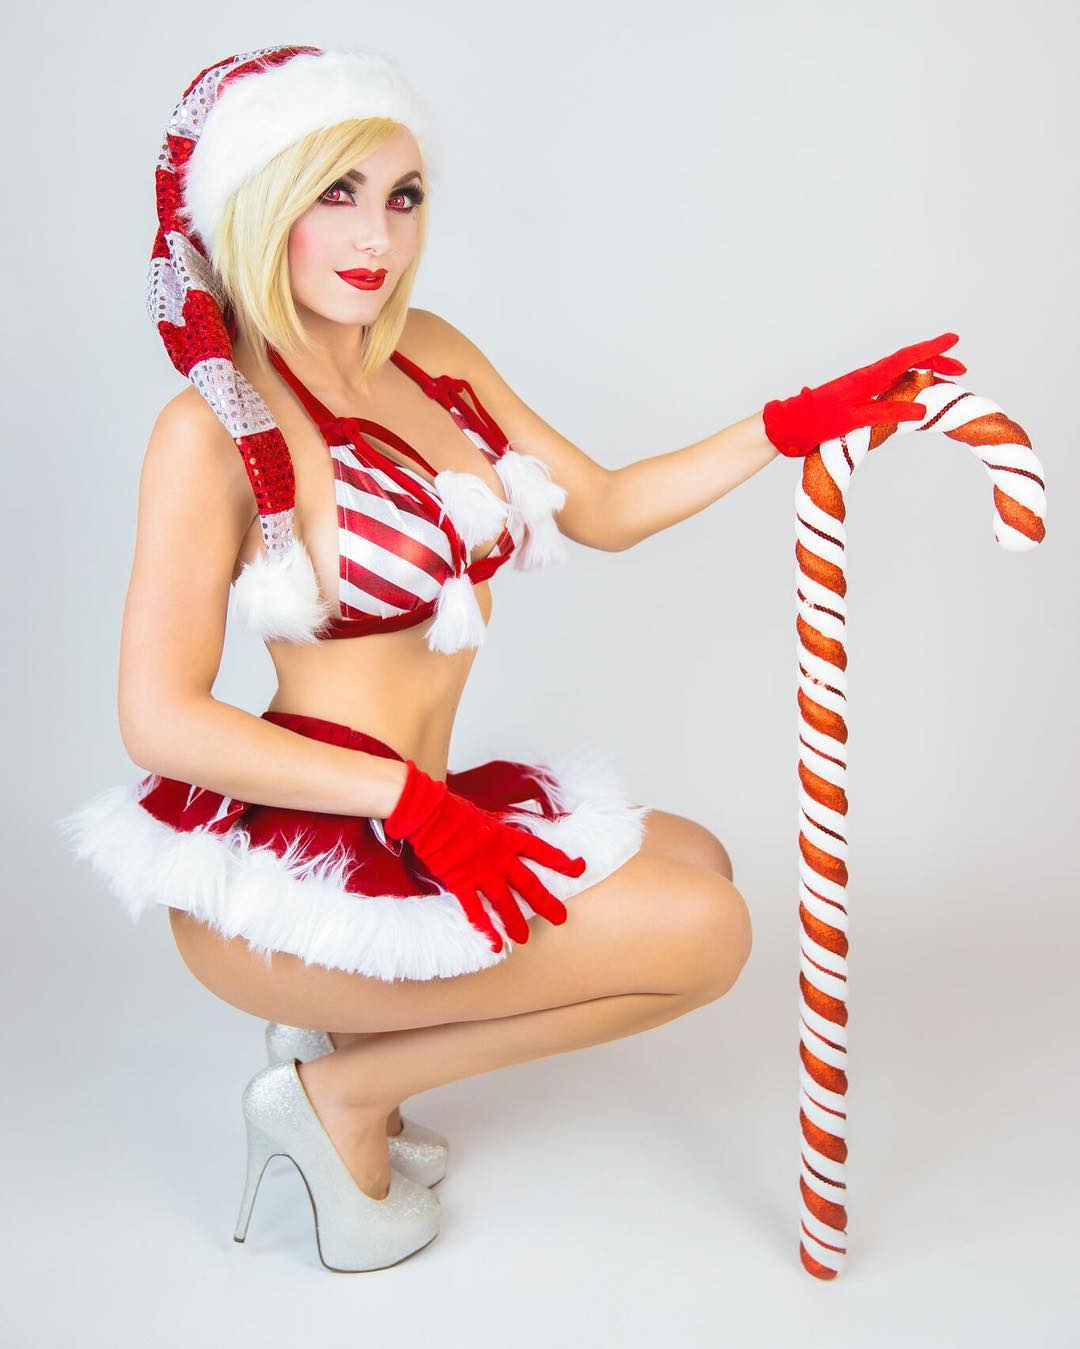 49 Hottest Jessica Nigri Big Butt Pictures Which Are Sure to Catch Your Attention | Best Of Comic Books